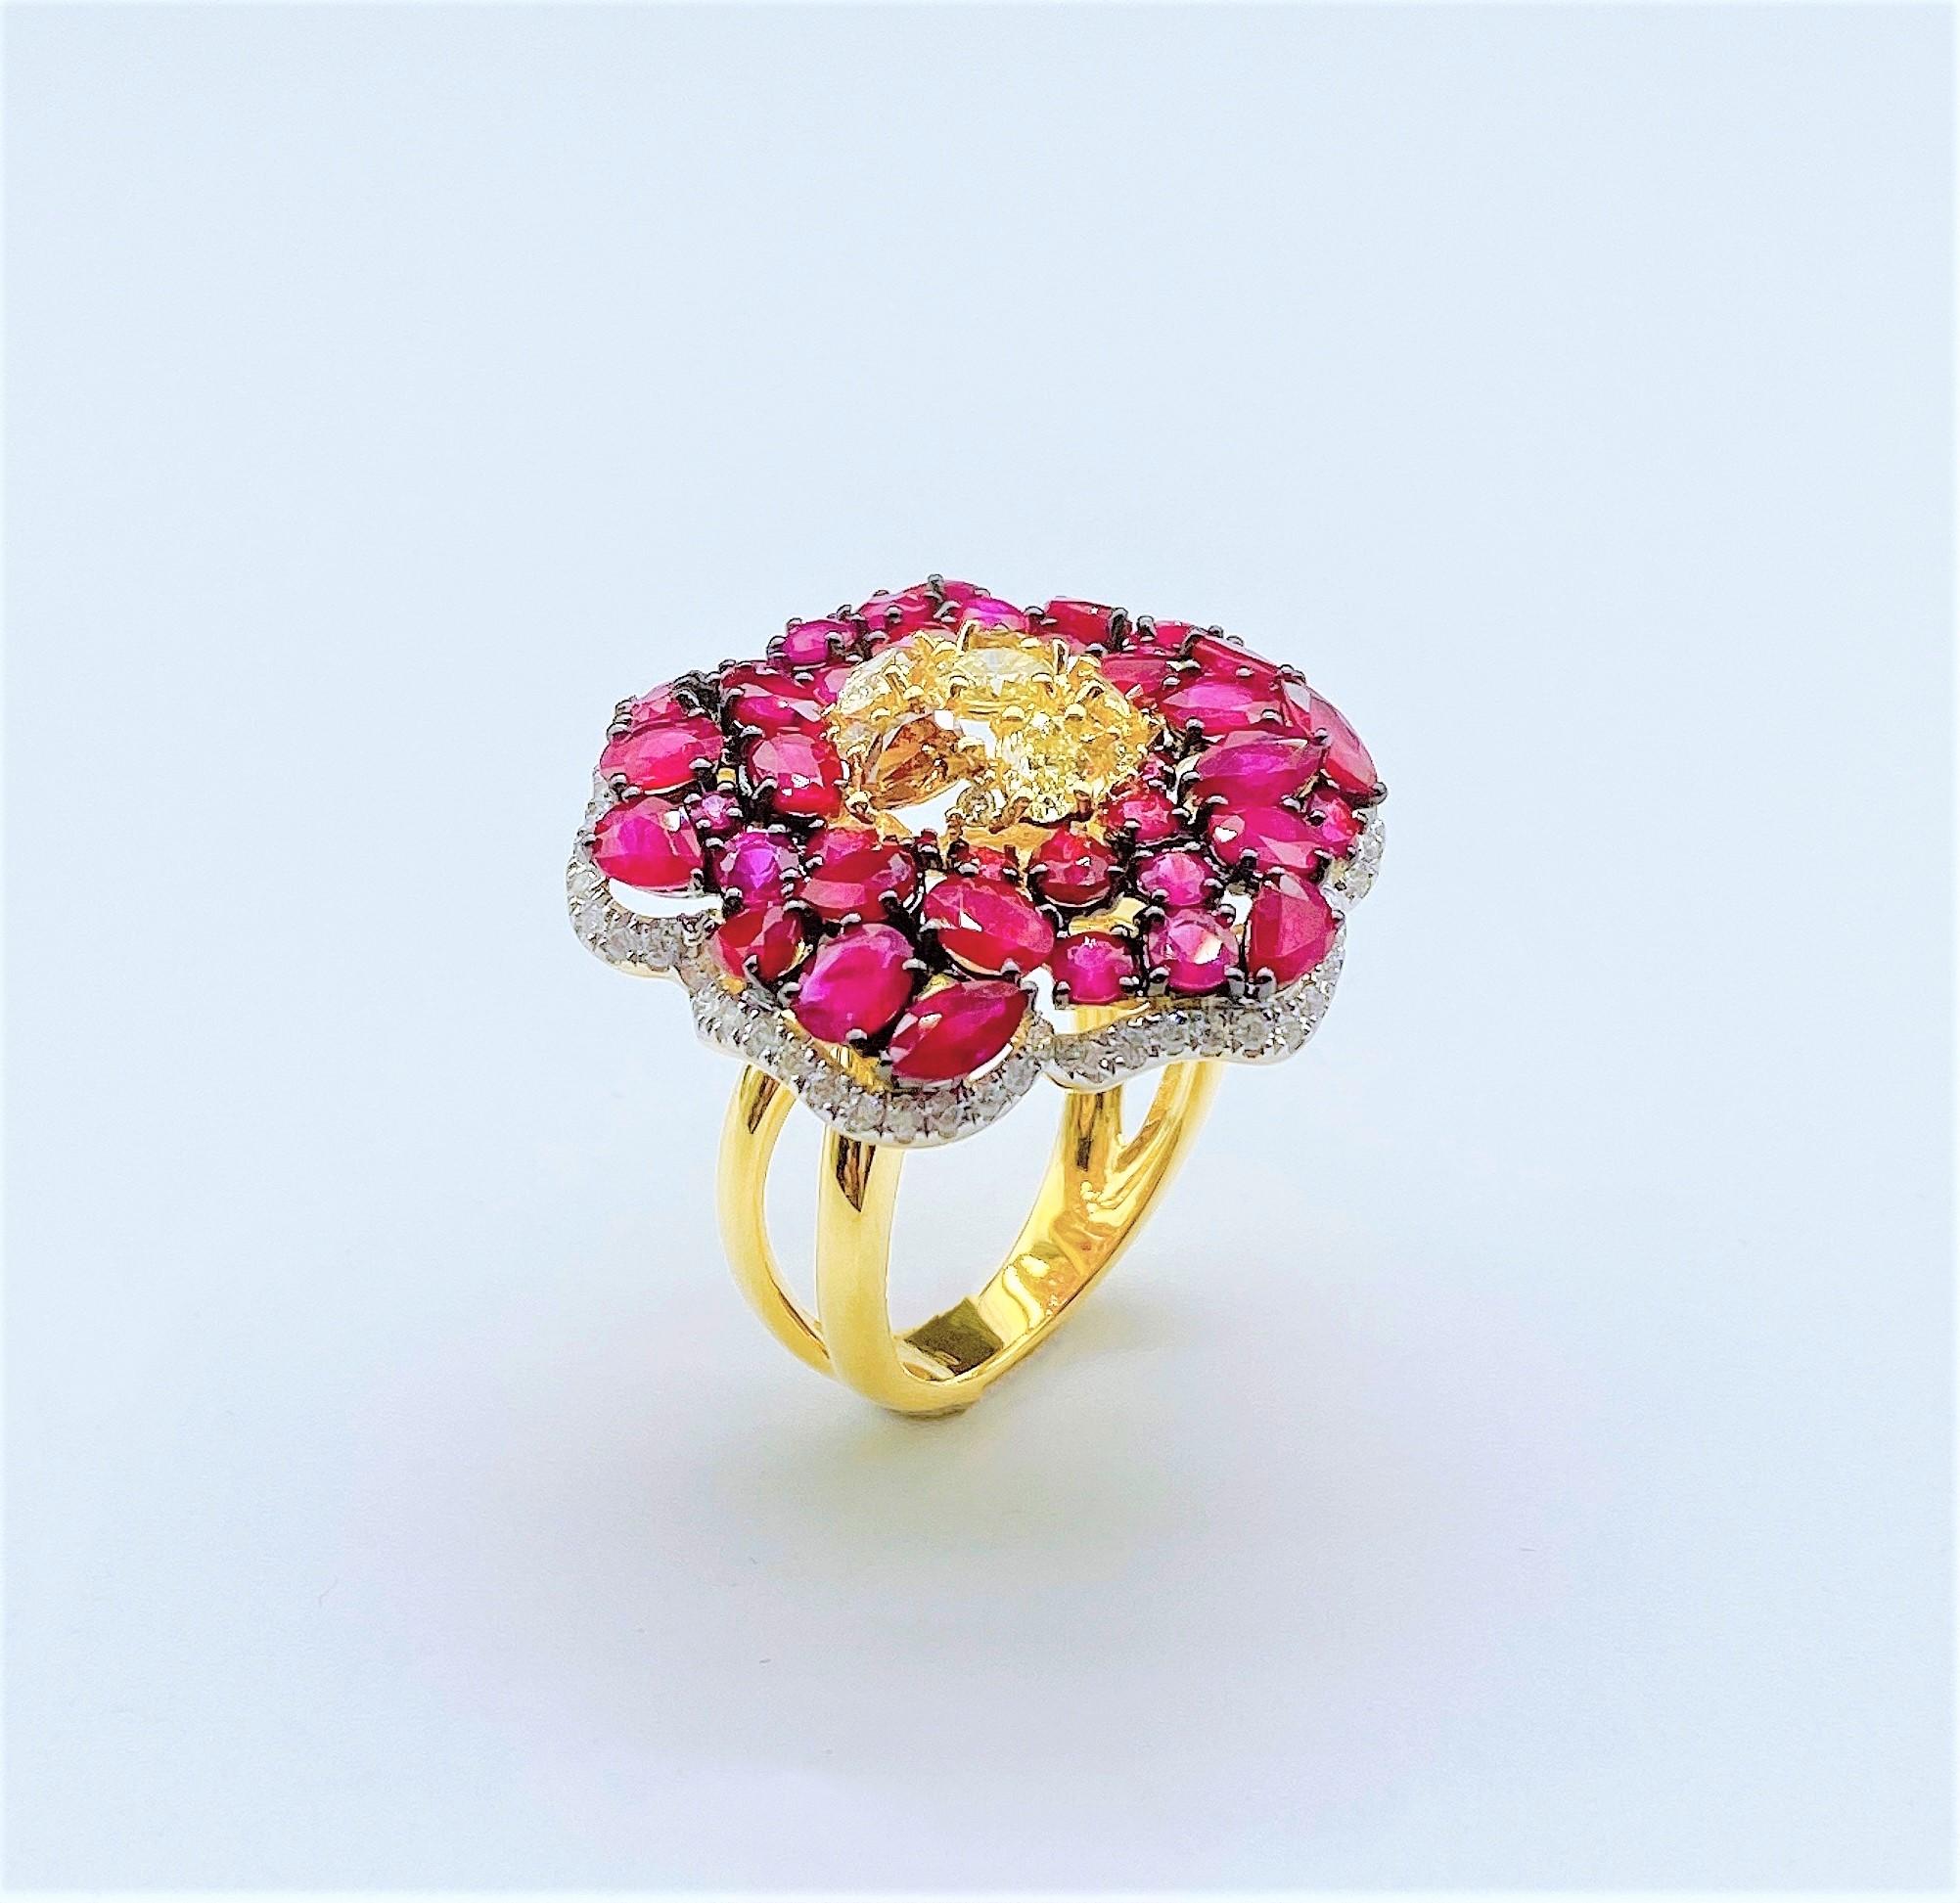 The Following Item we are offering is a Rare Important Radiant 18KT Gold Large Rare Fancy Gorgeous Ruby Ring. Ring is comprised of Gorgeous Rubies Framed with White Diamonds and adorned with Magnificent Fancy Yellow Glittering Diamonds at